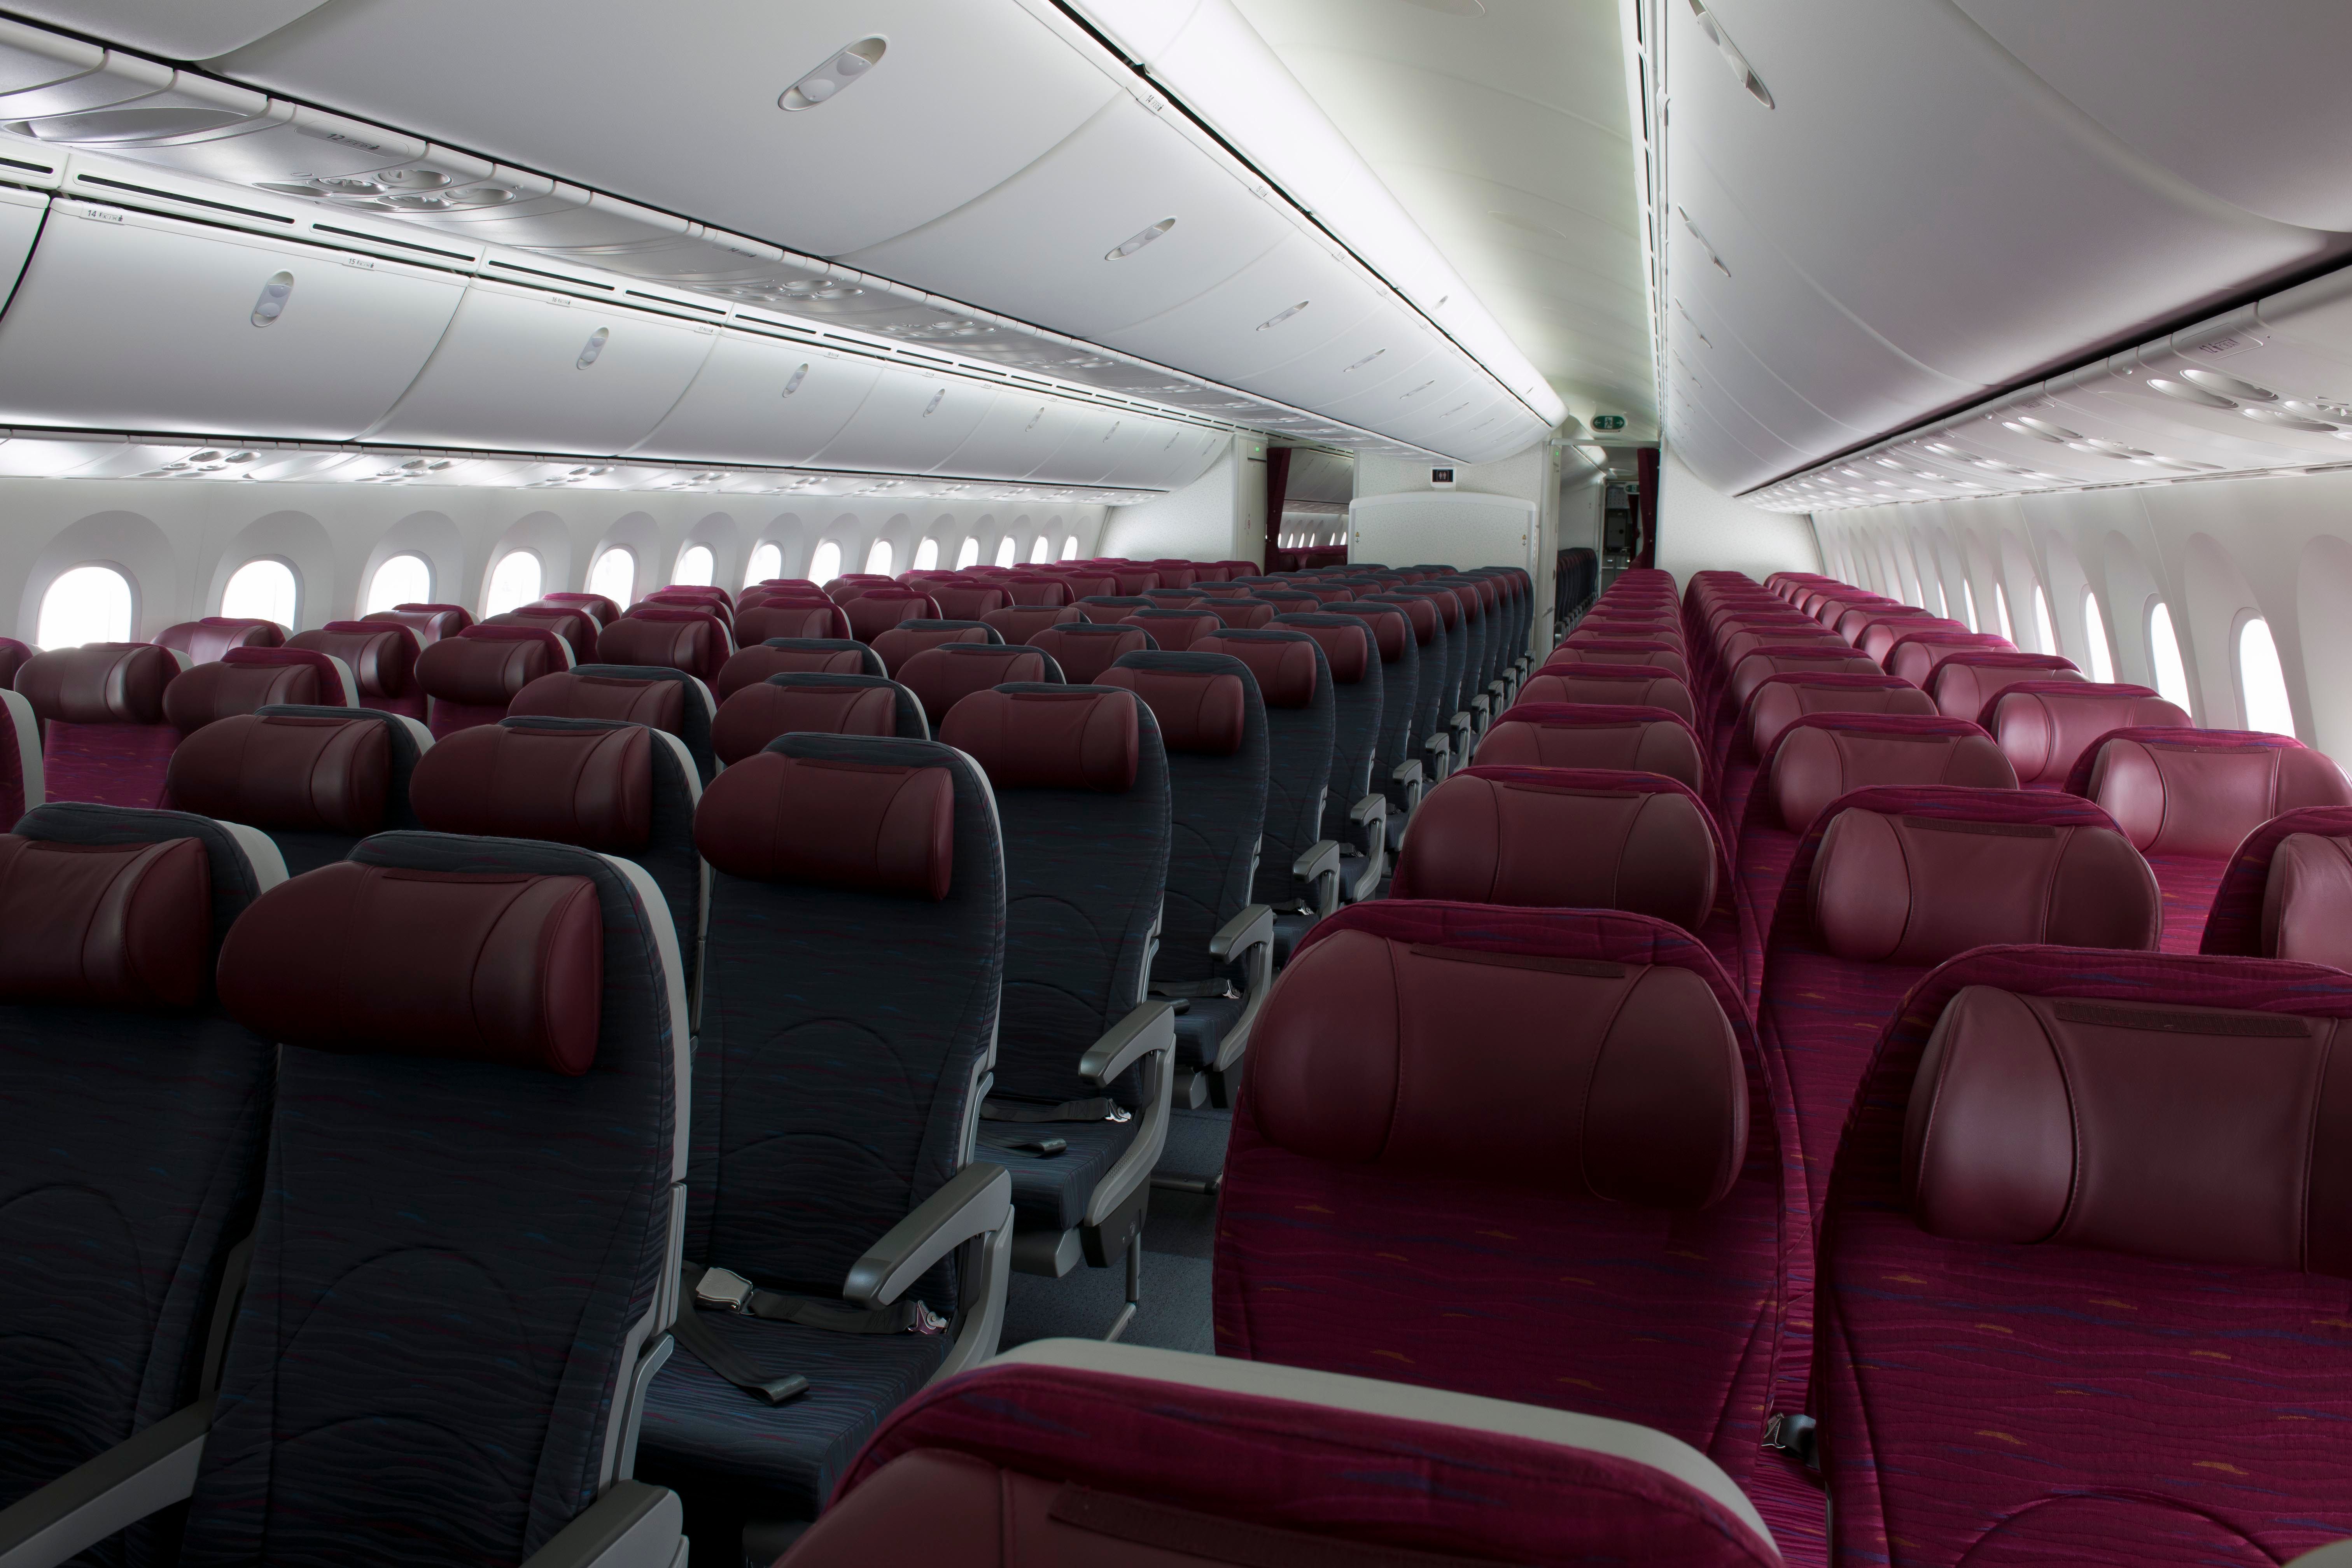 Inside the Qatar Airways economy class cabin on the Boeing 787.